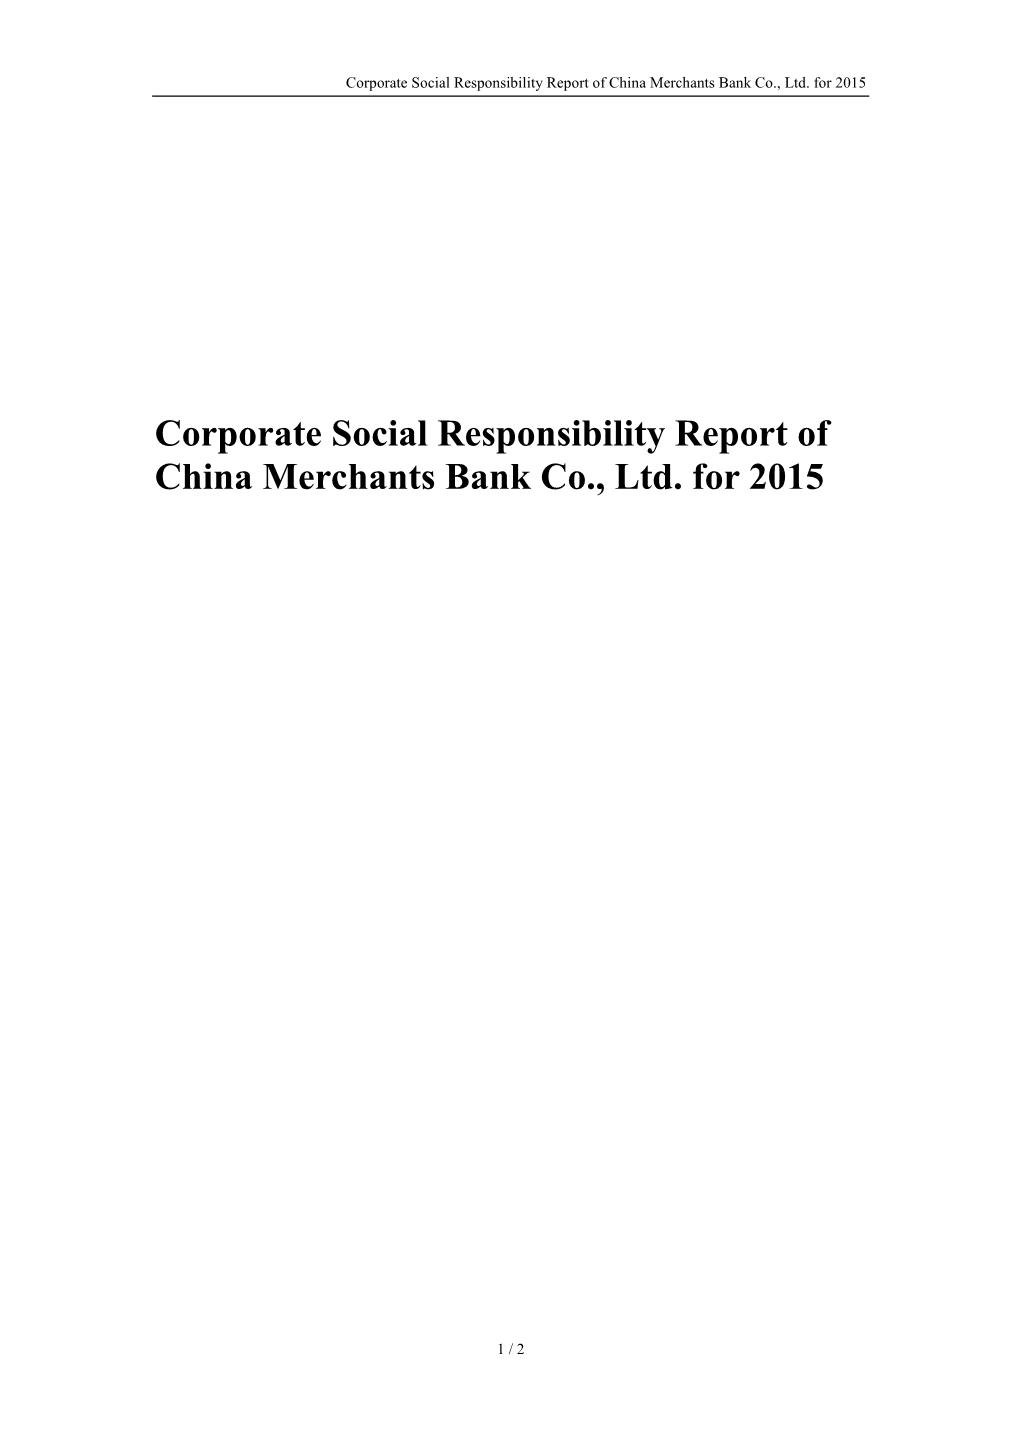 Corporate Social Responsibility Report of China Merchants Bank Co., Ltd. for 2015